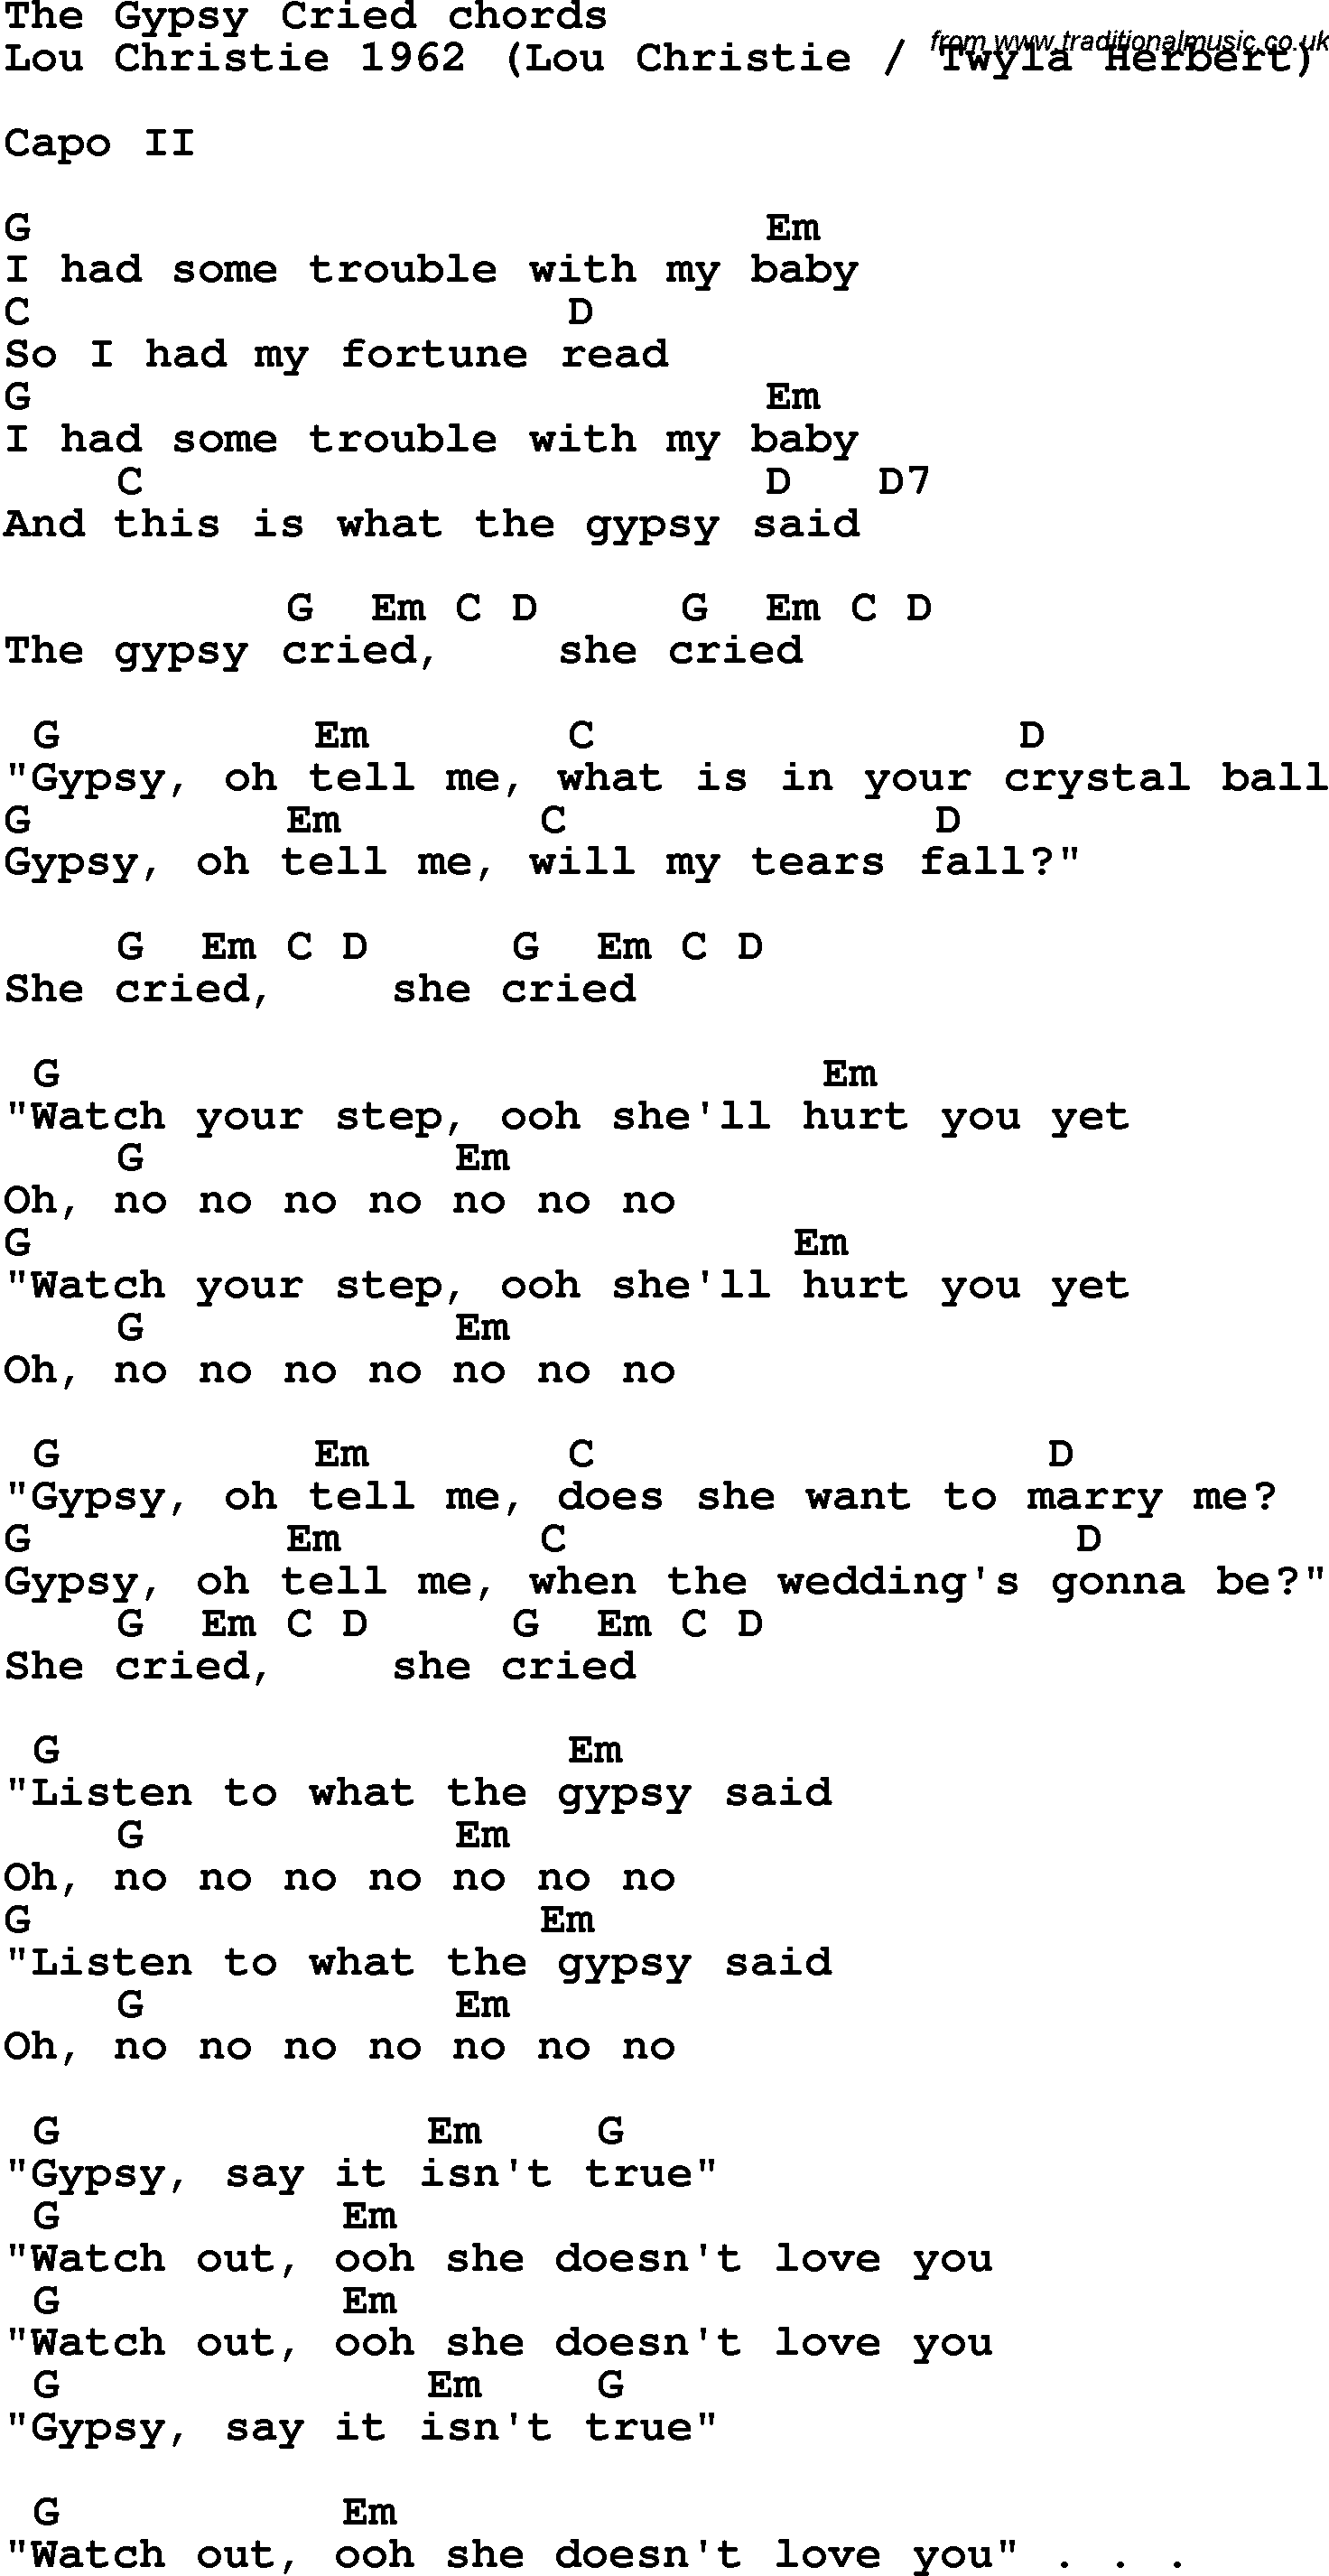 Song Lyrics with guitar chords for The Gypsy Cried - Lou Christie 1962